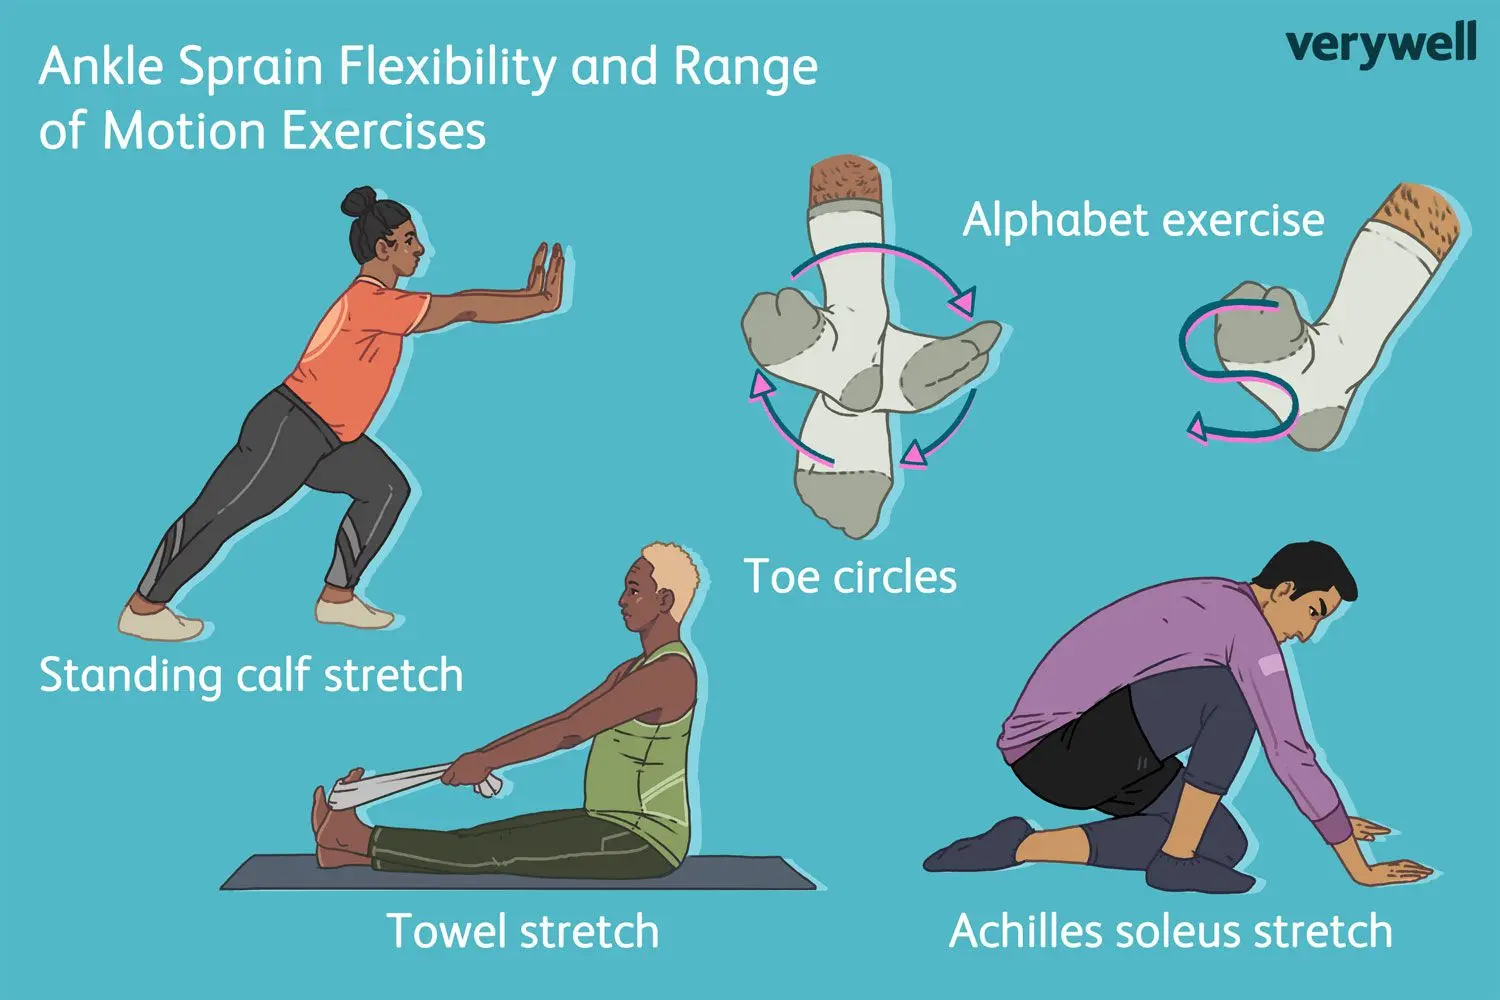 yoga for ankle pain - What is the best way to relieve ankle pain